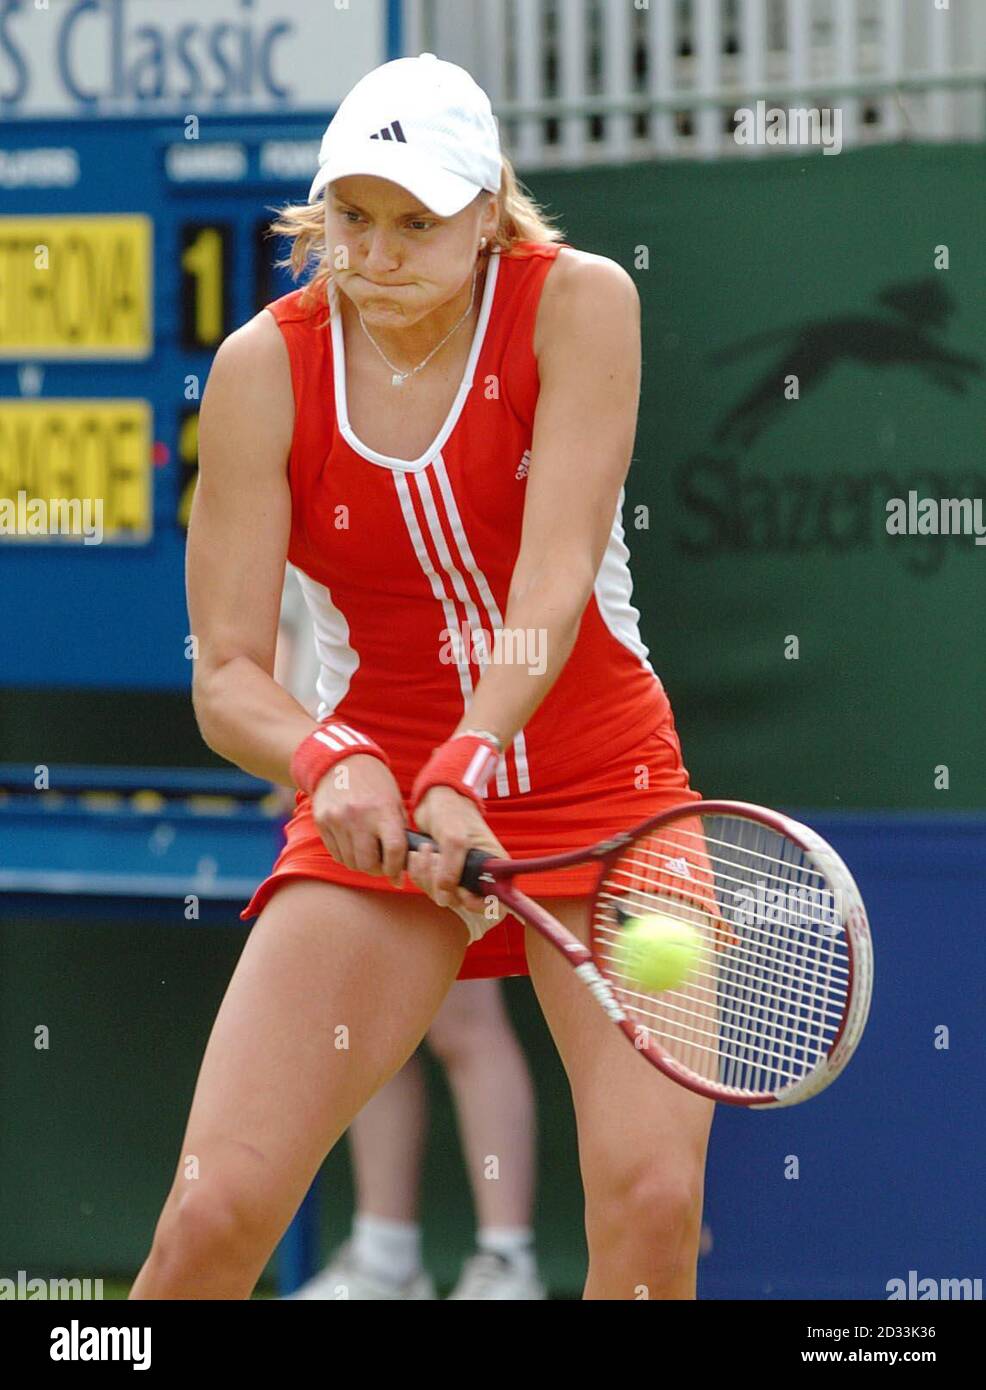 No.1 seed Russia's Nadia Petrova returns a serve from Japan's Shinobu Asagoe during their match at the DFS Classic in Edgbaston, Birmingham. Stock Photo